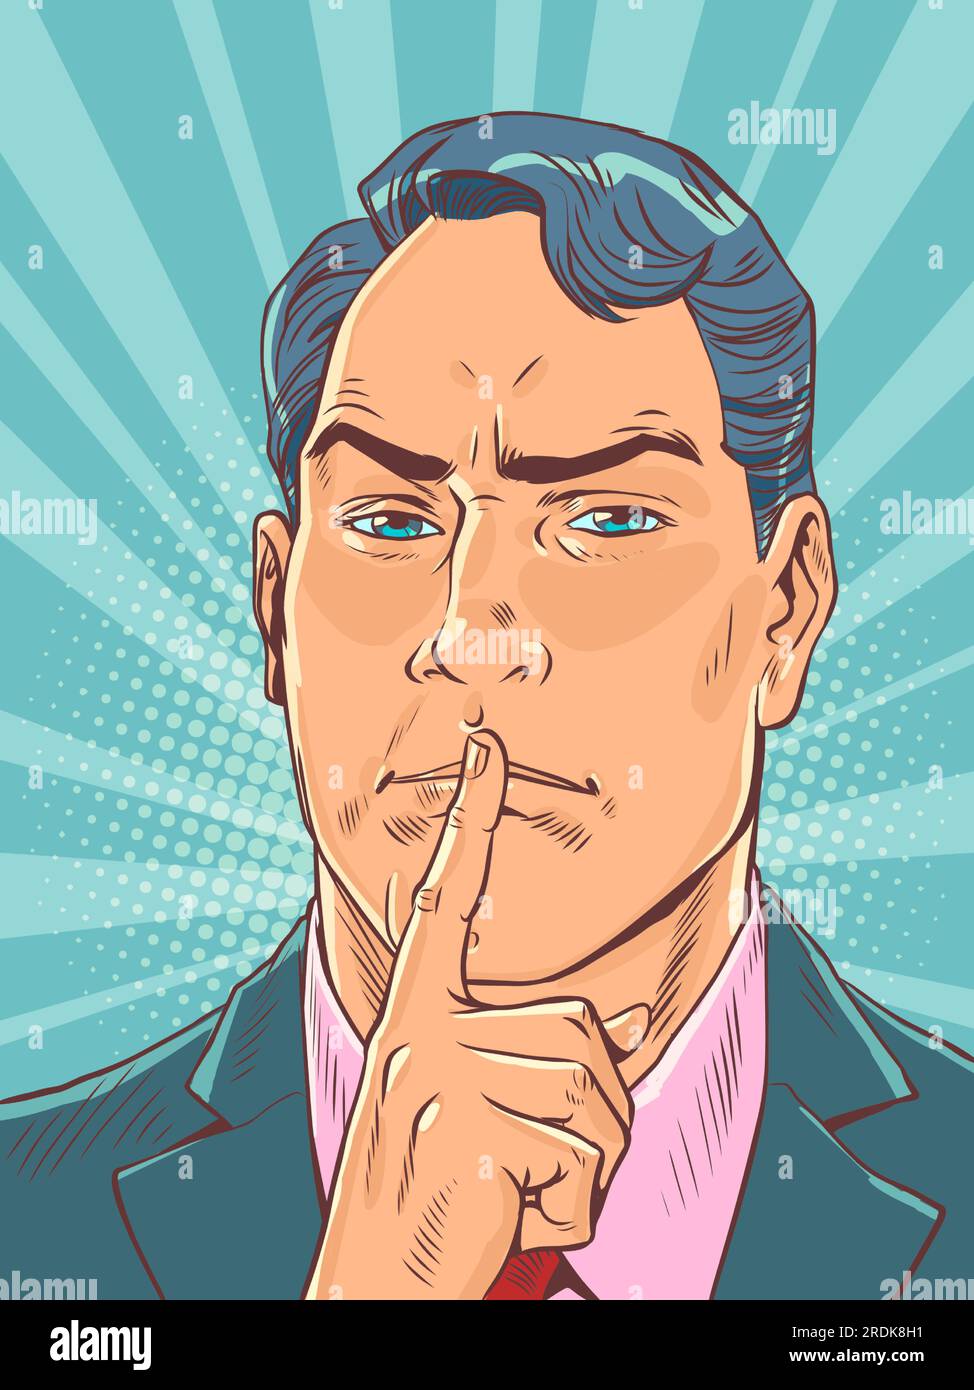 Secrets that cannot be told. The ethics of working for a large corporation. A man in a suit puts his palm to his mouth.. Pop Art Retro Stock Vector